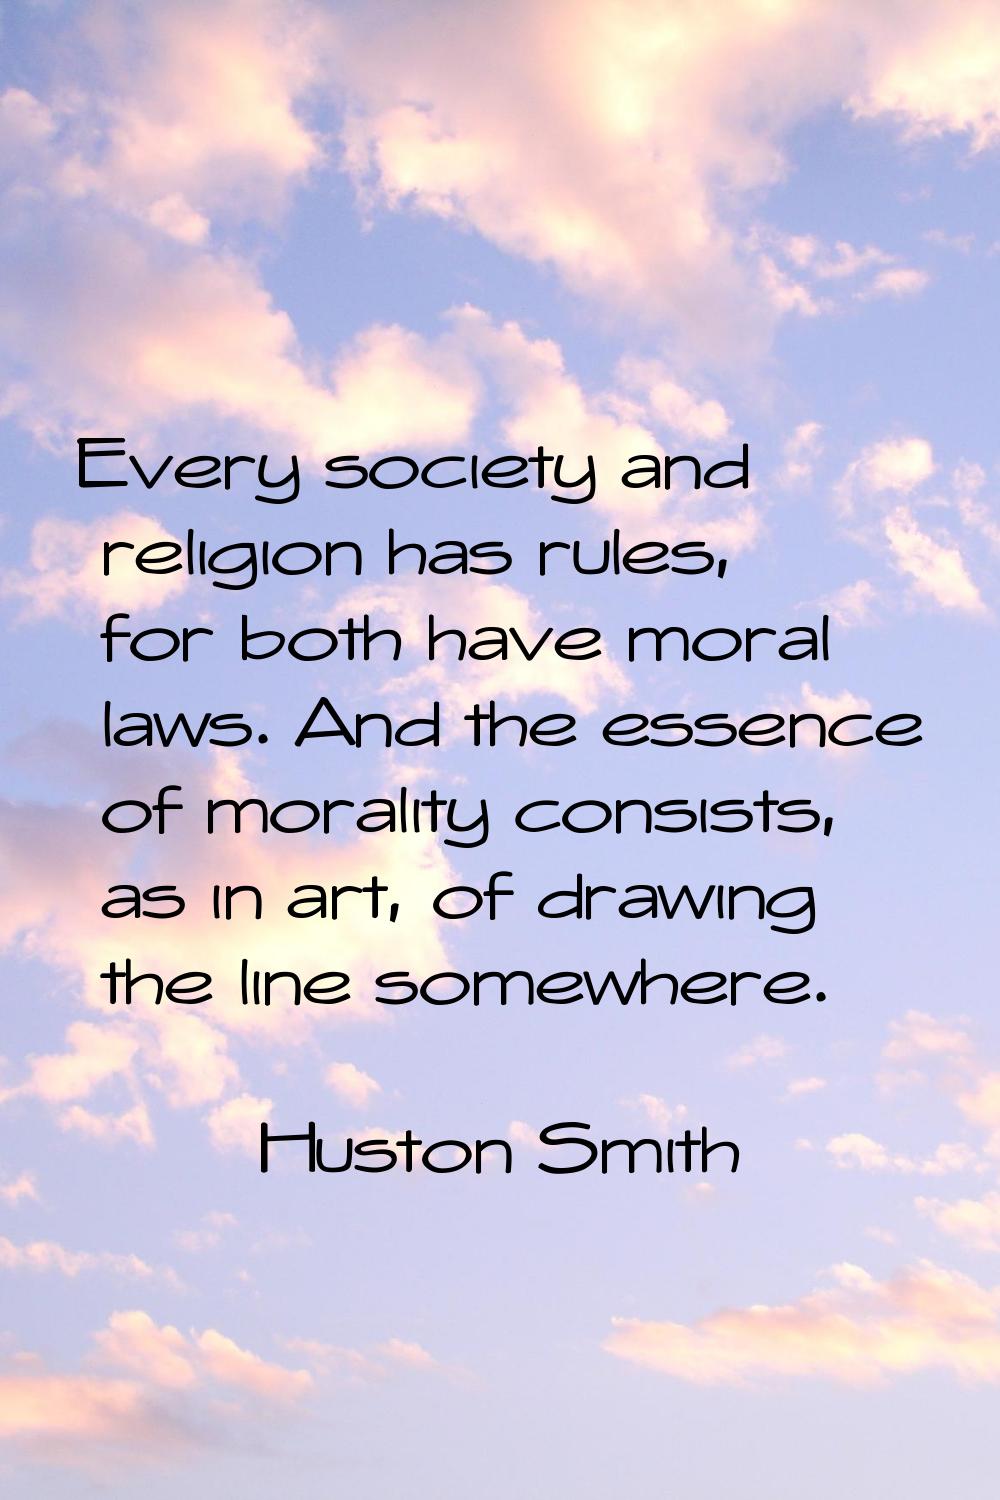 Every society and religion has rules, for both have moral laws. And the essence of morality consist